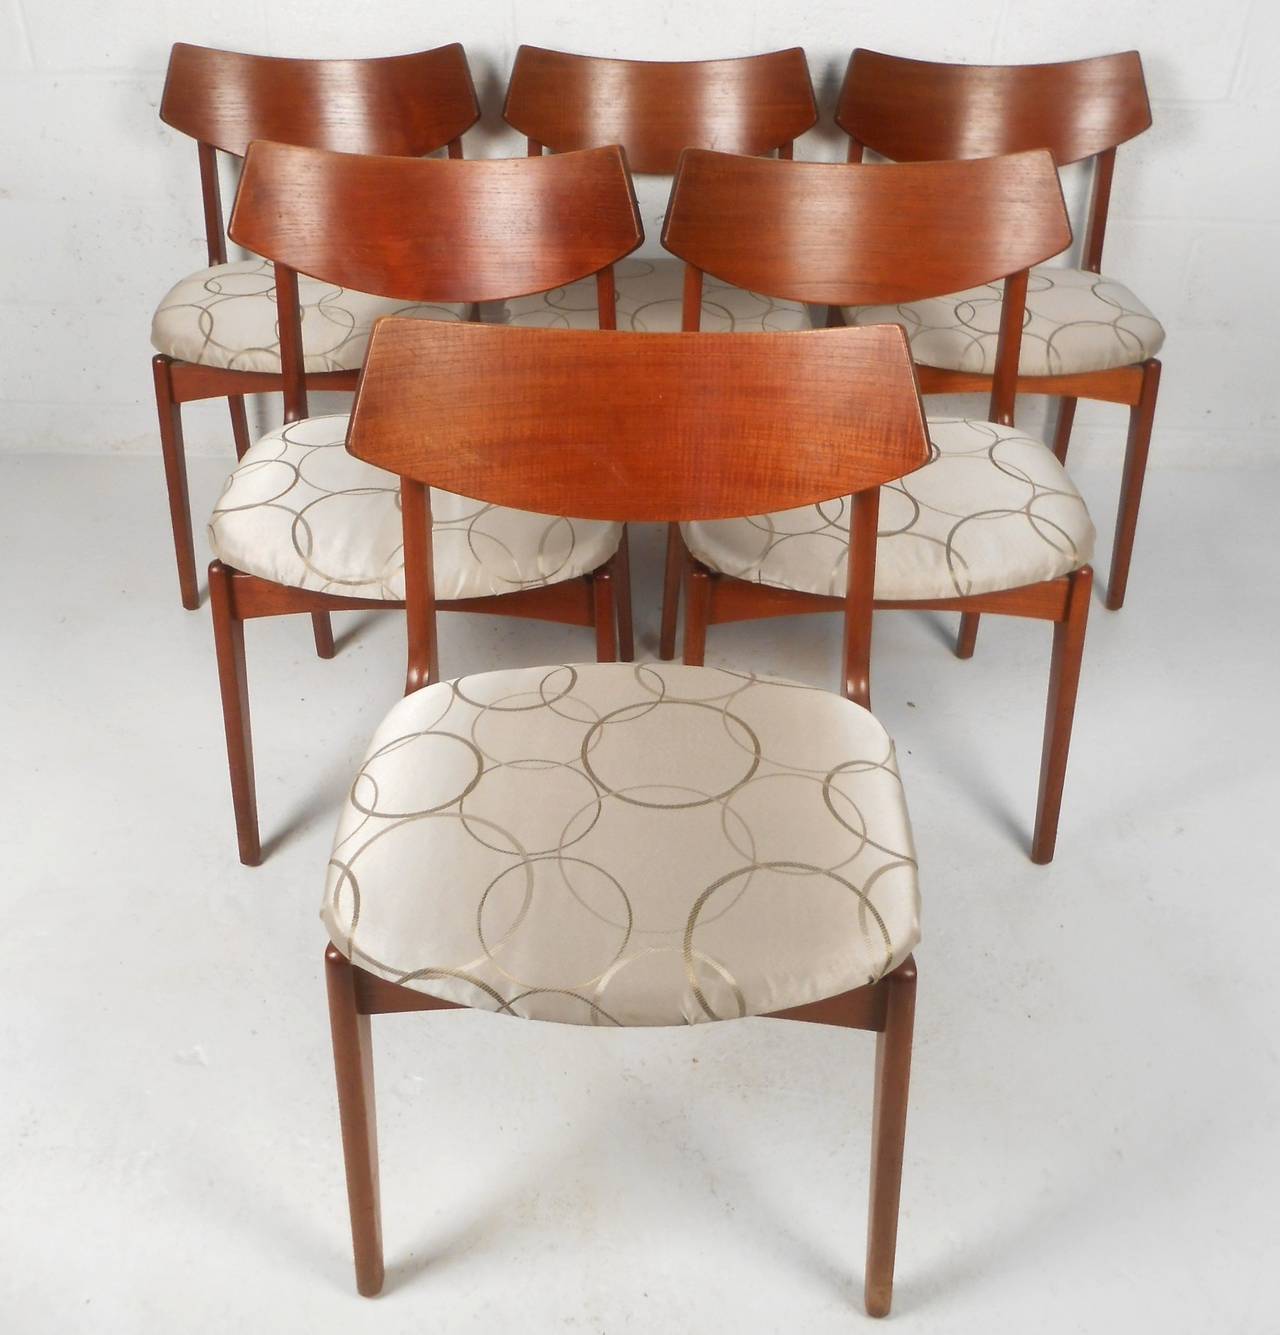 This set of six mid-century chairs make a comfortable and unique addition to any dining room. By Erik Buch for Funder-Scmidt & Madsen, the set offers Comfortable curved back design along with wide seats and wonderful teak finish. Please confirm item